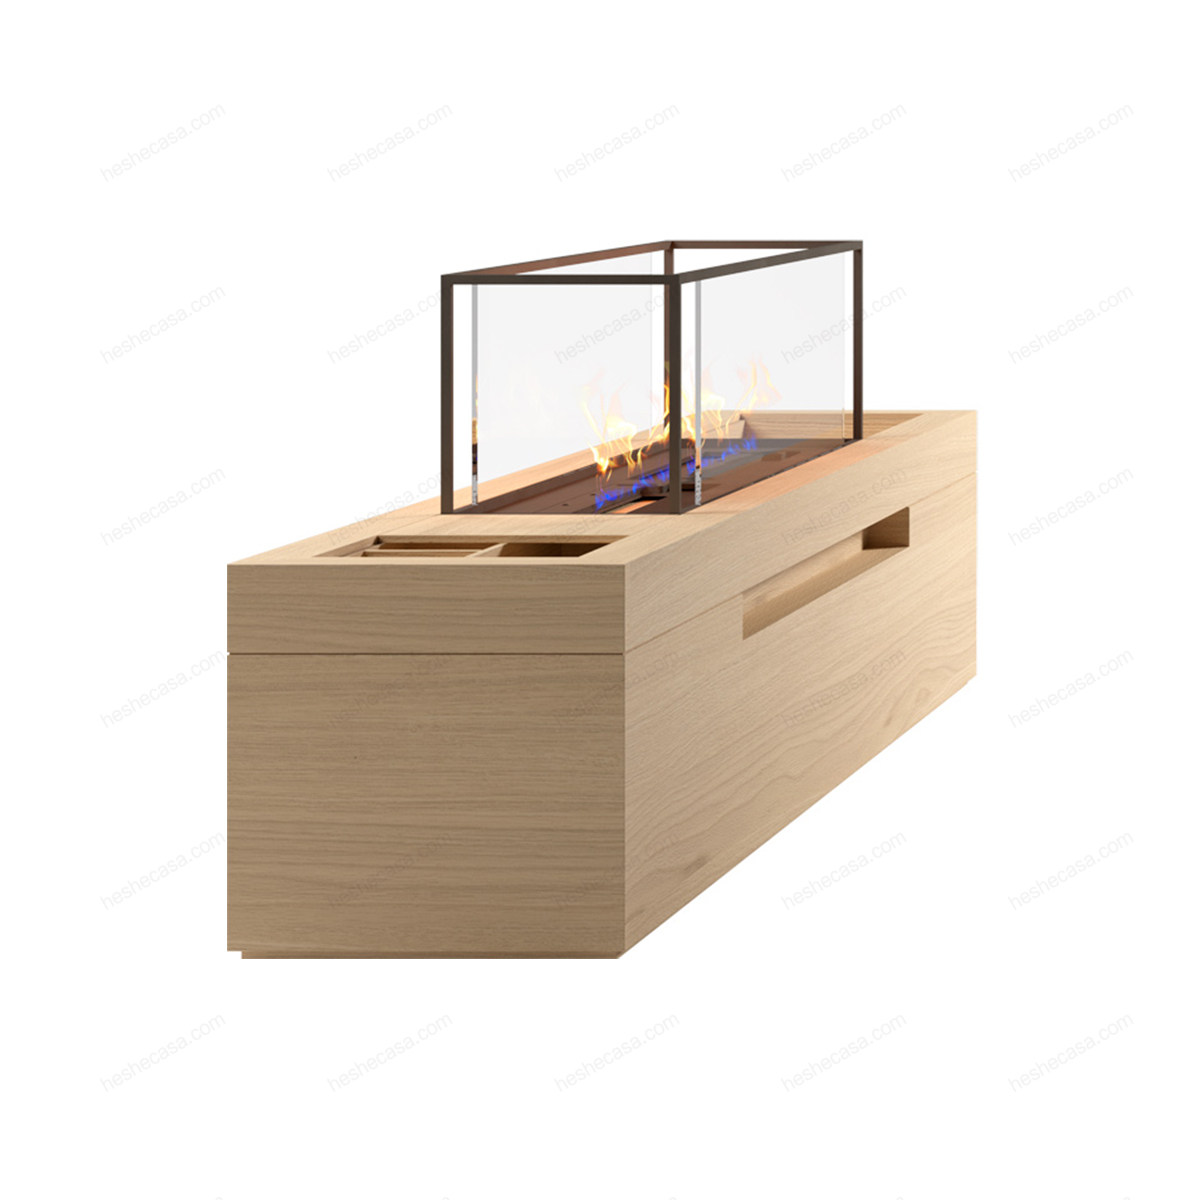 pyra-low-table-with-fireplace茶几/边几